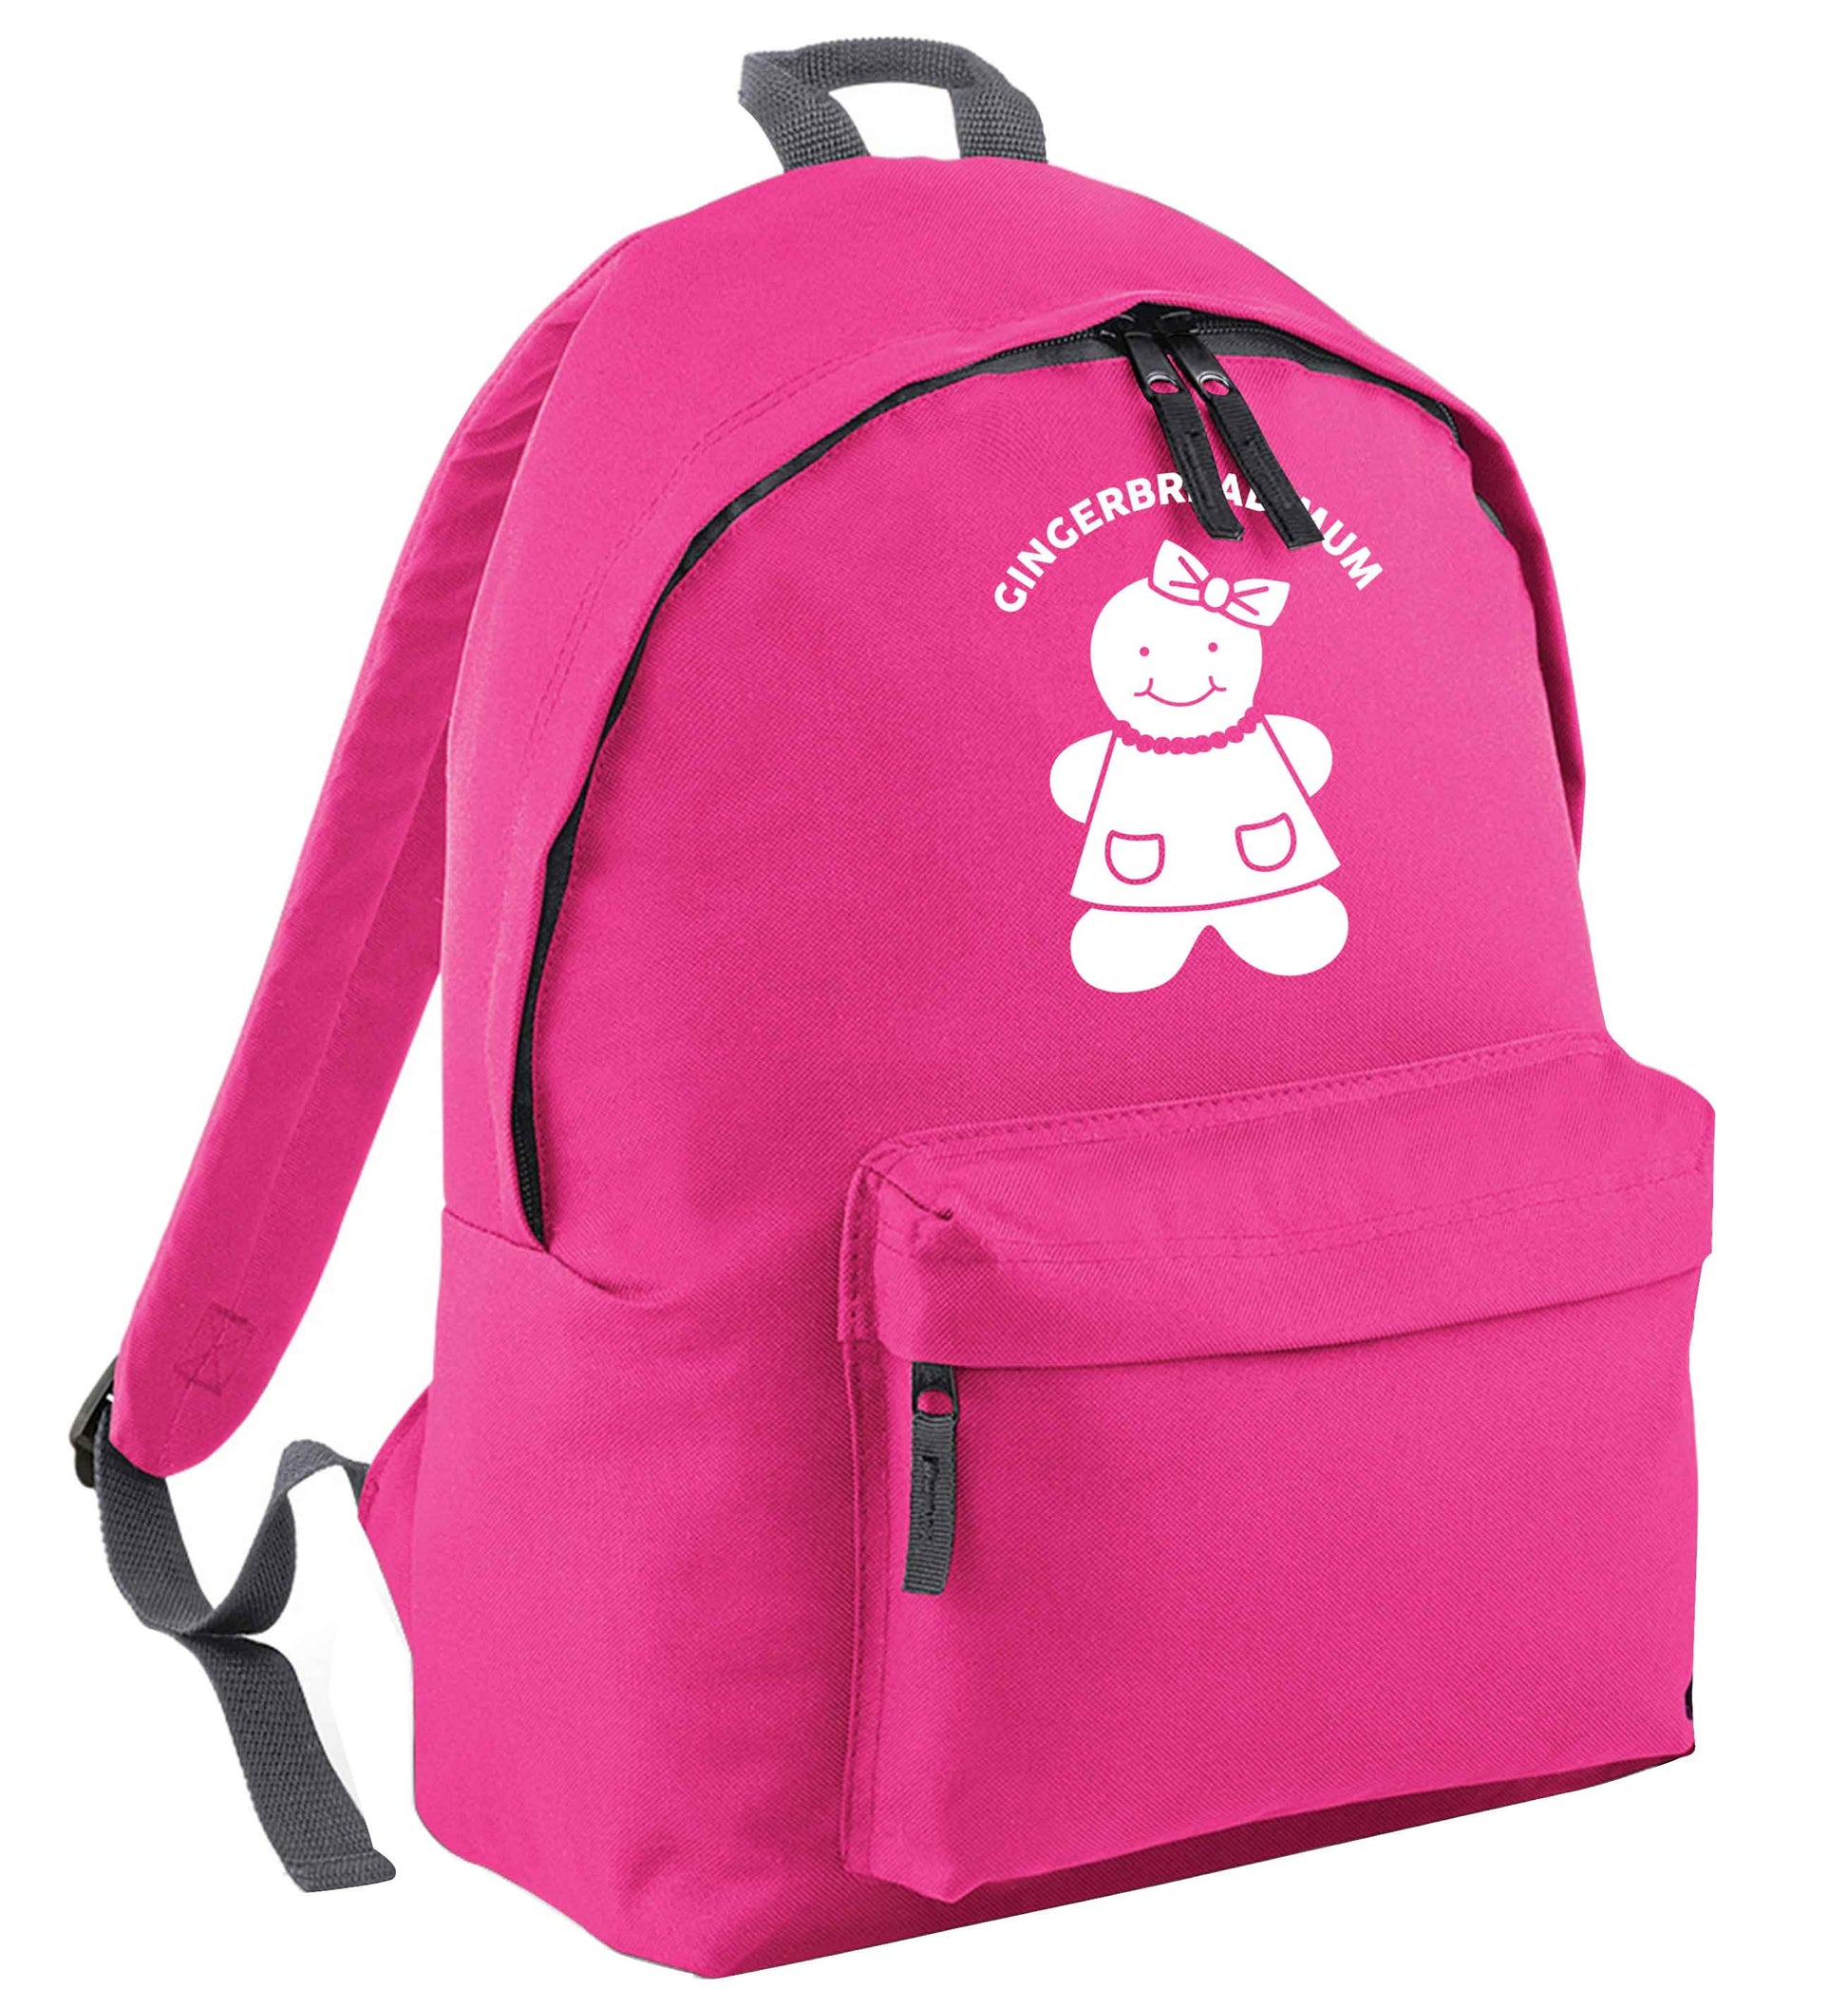 Merry Christmas pink adults backpack